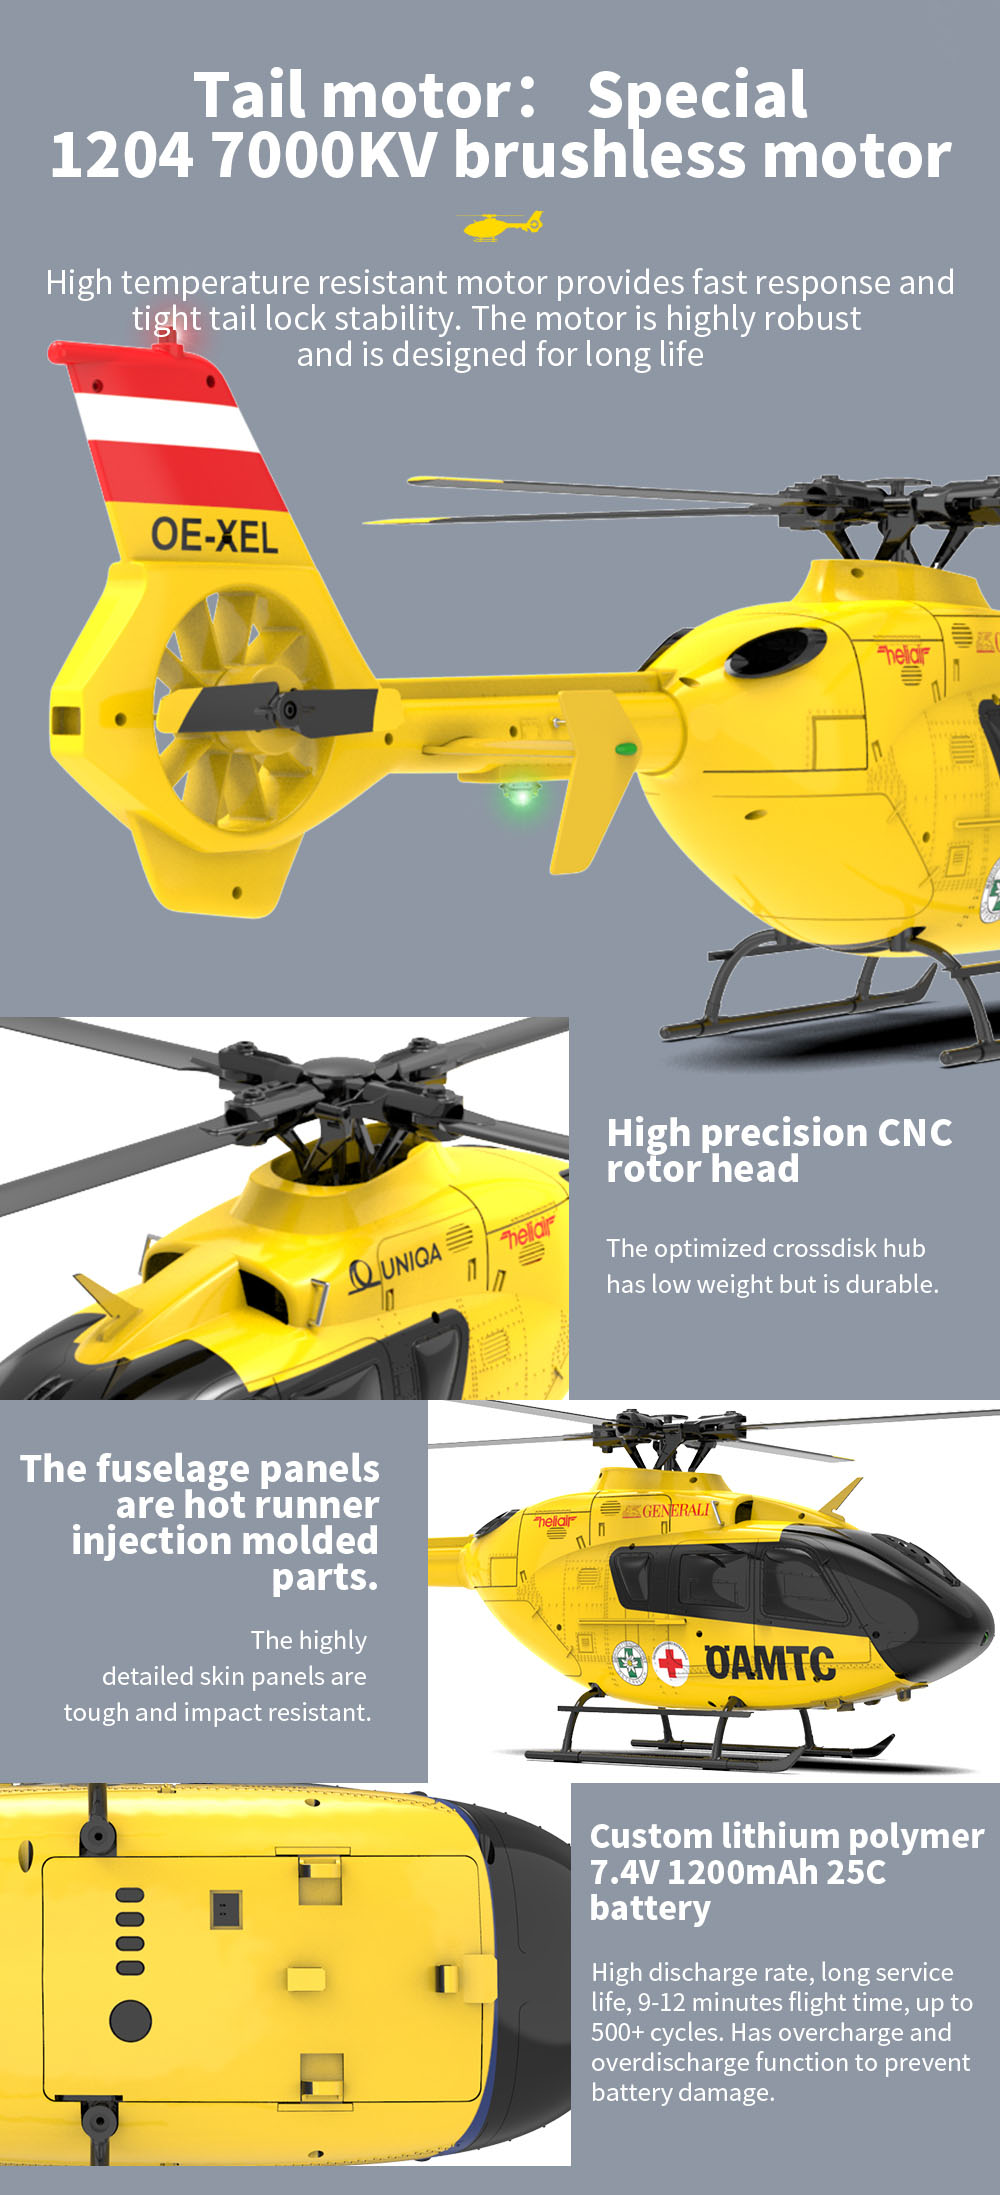 YXZNRC F06 2.4G 6CH 1:36 EC135 Scale Yellow Fuselage Flybarless RC Helicopter RTF